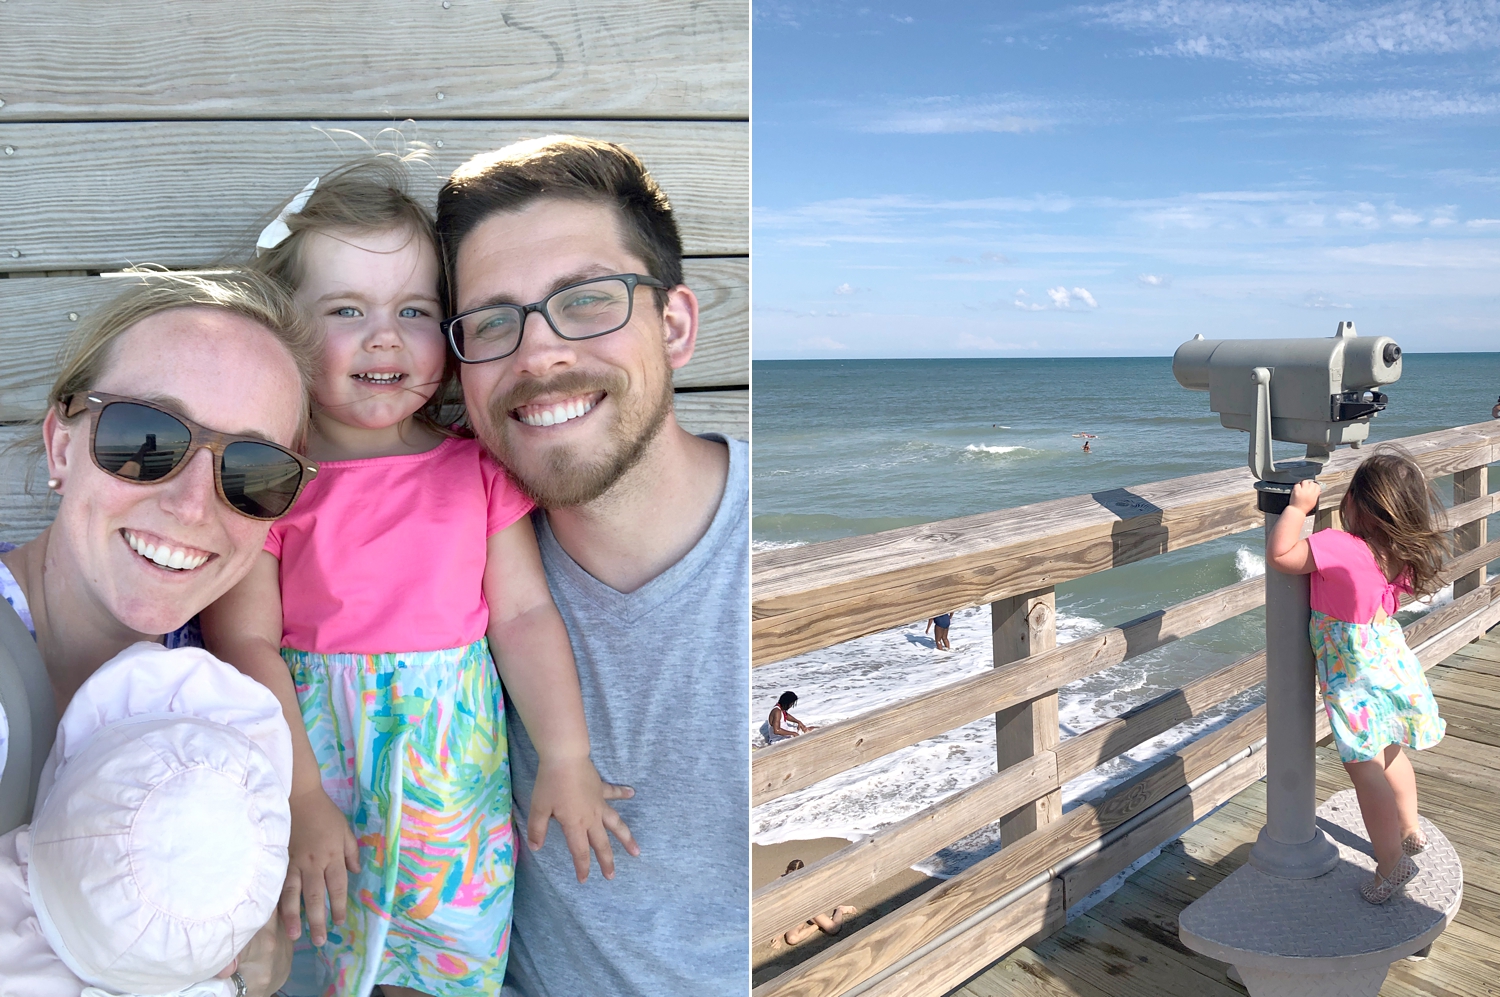  We had to visit the pier!  